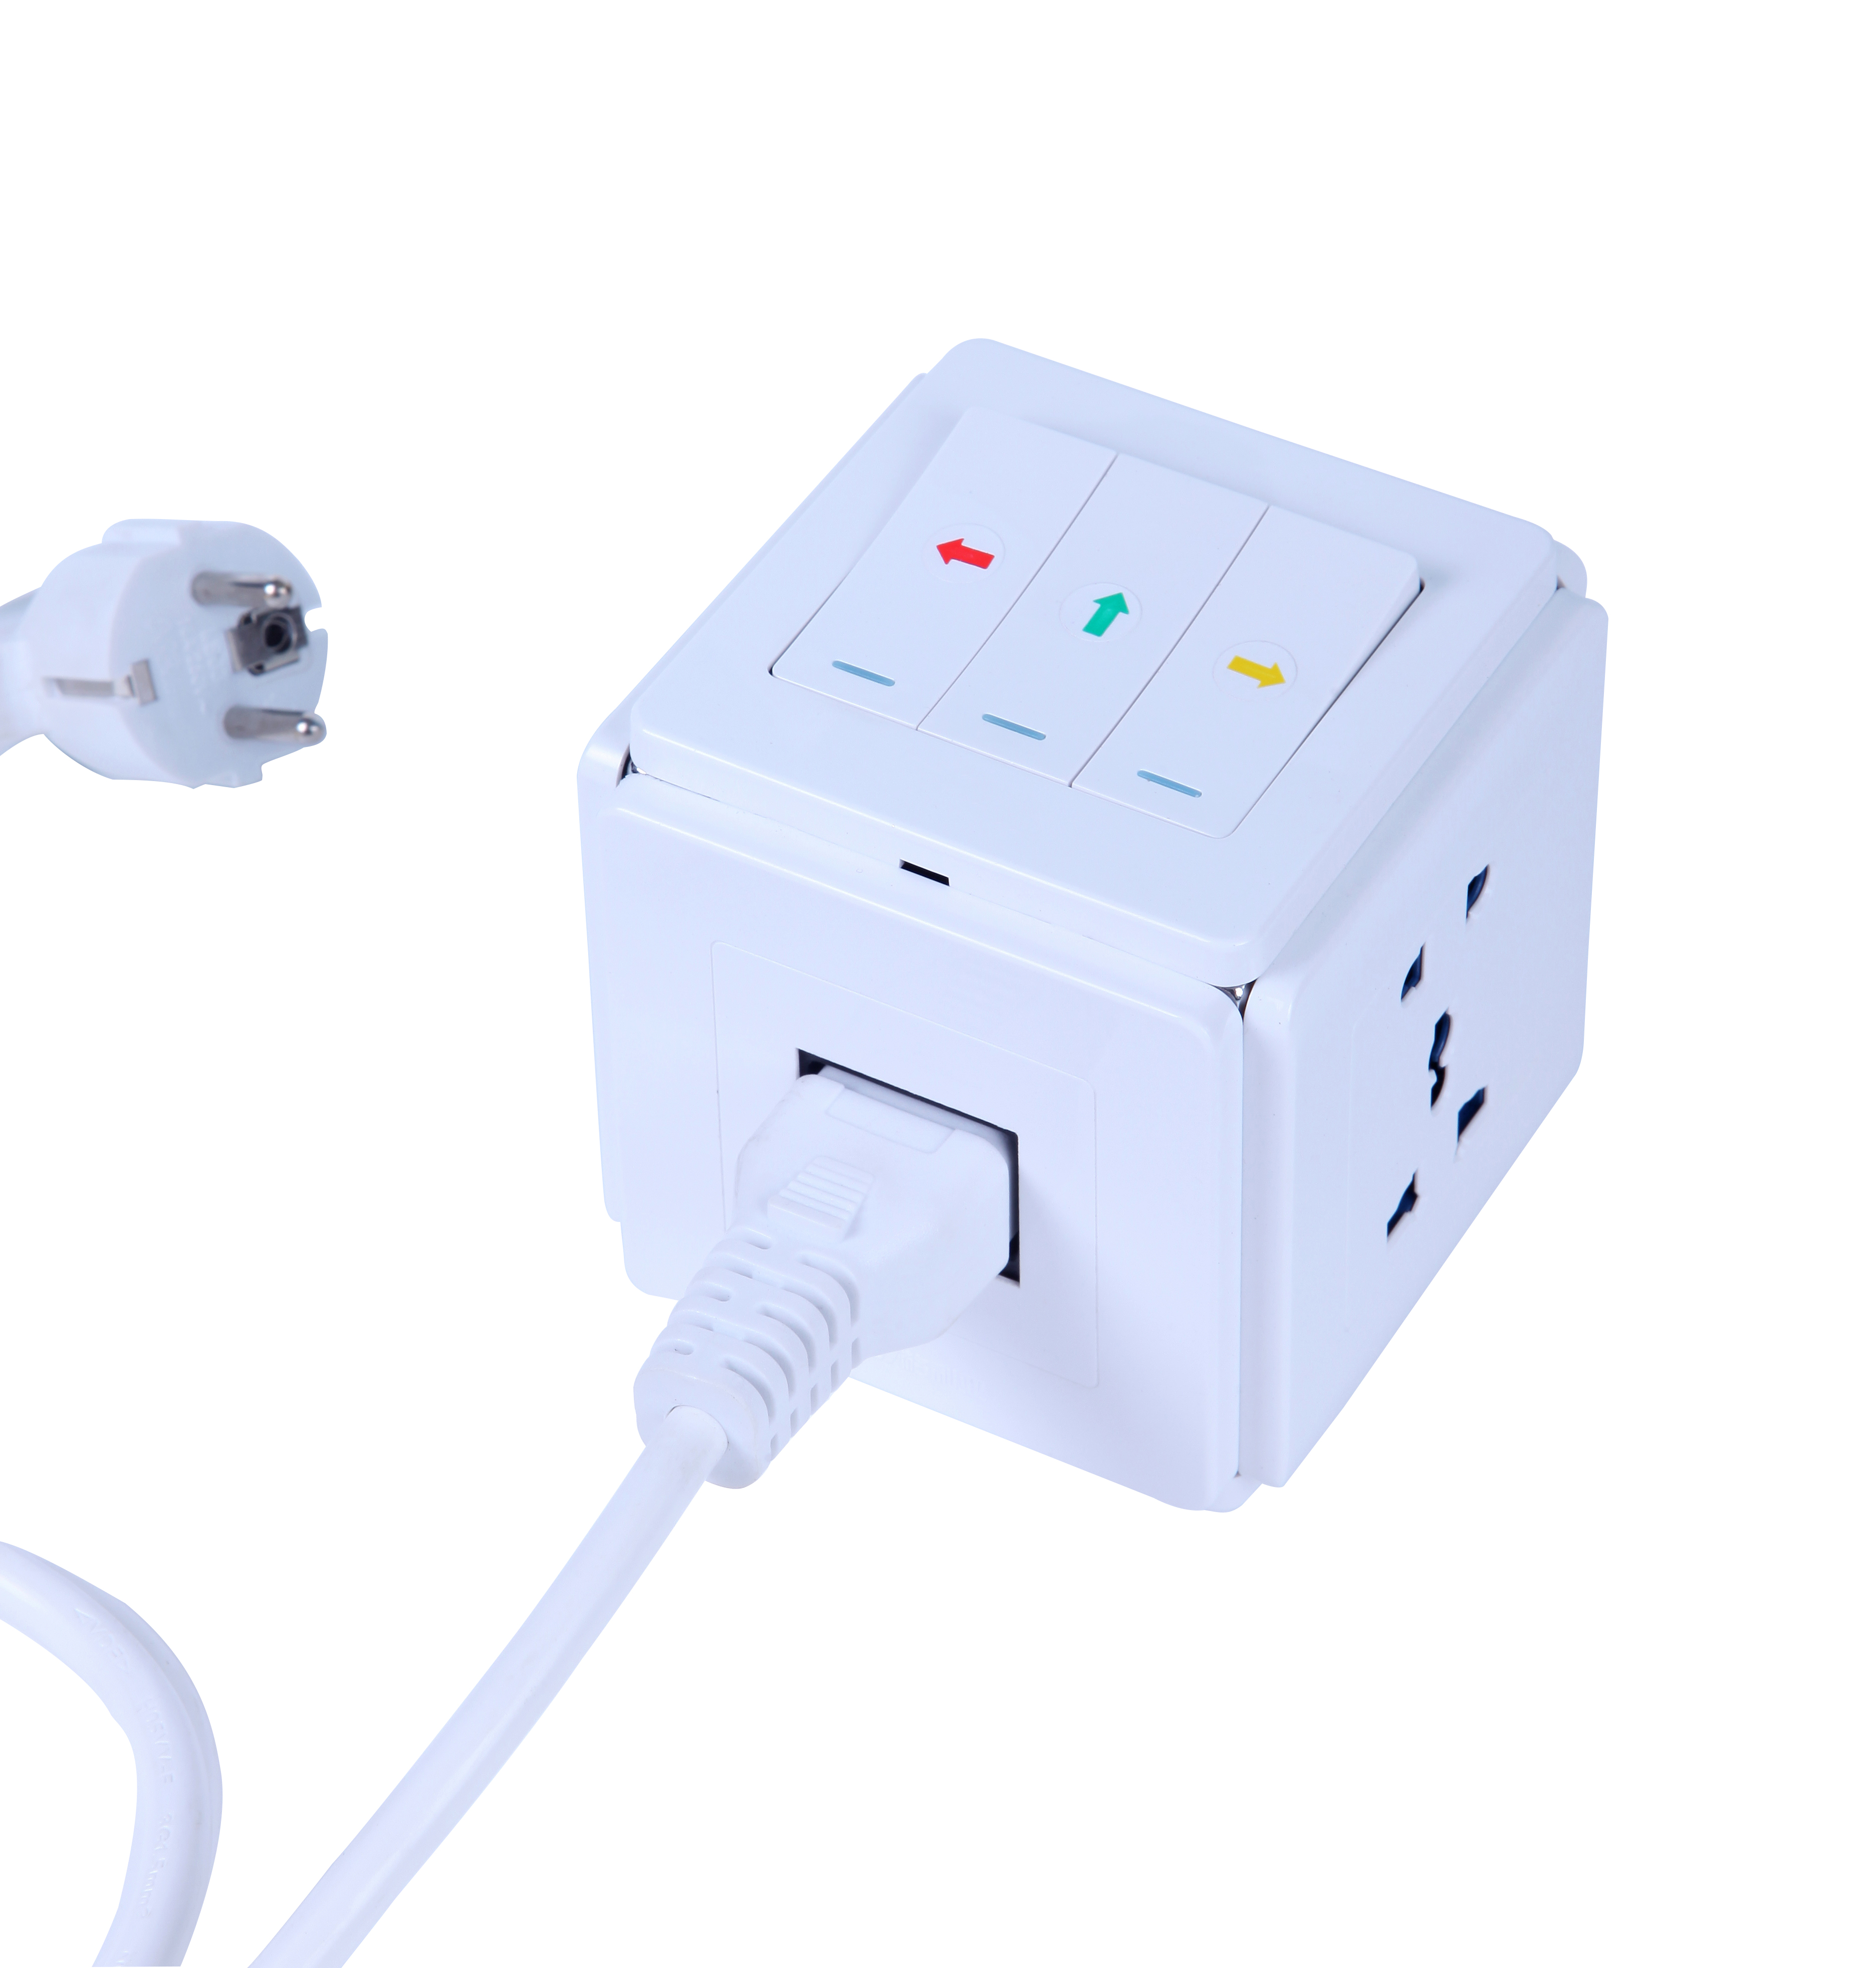 New Multifunctional Adapter Smart Power Plug Cube Socket for Office Energy Saving with Common 1.5m Power Cord